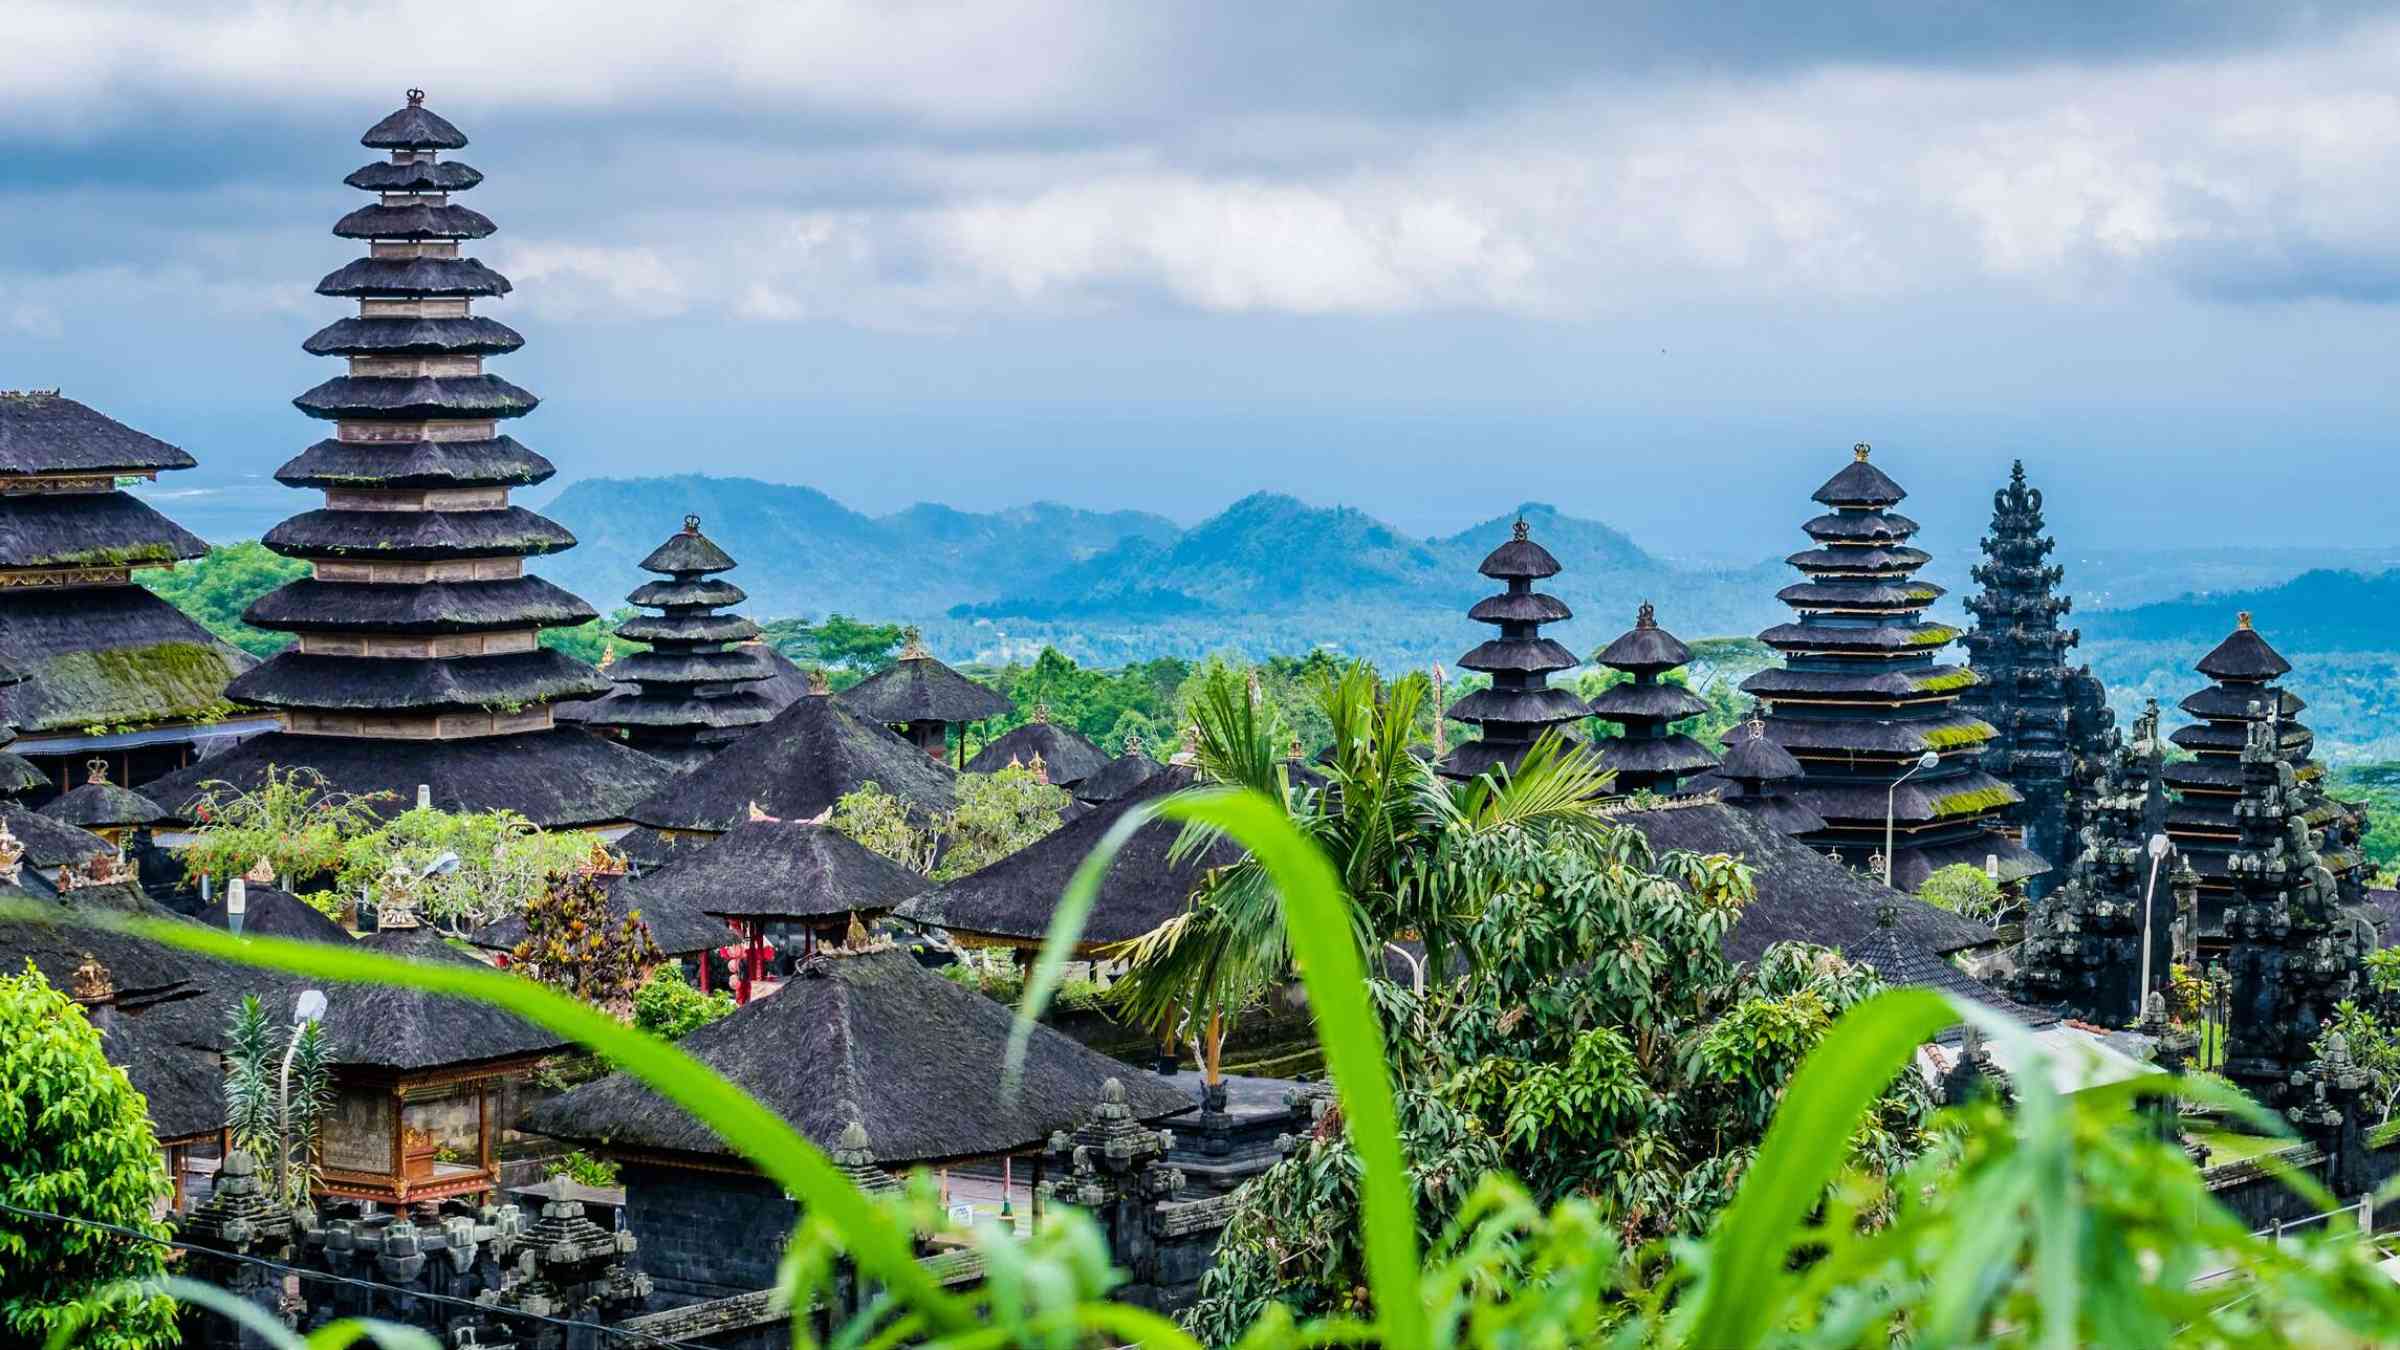 View of Balinese temples and greenery with mountains in the background